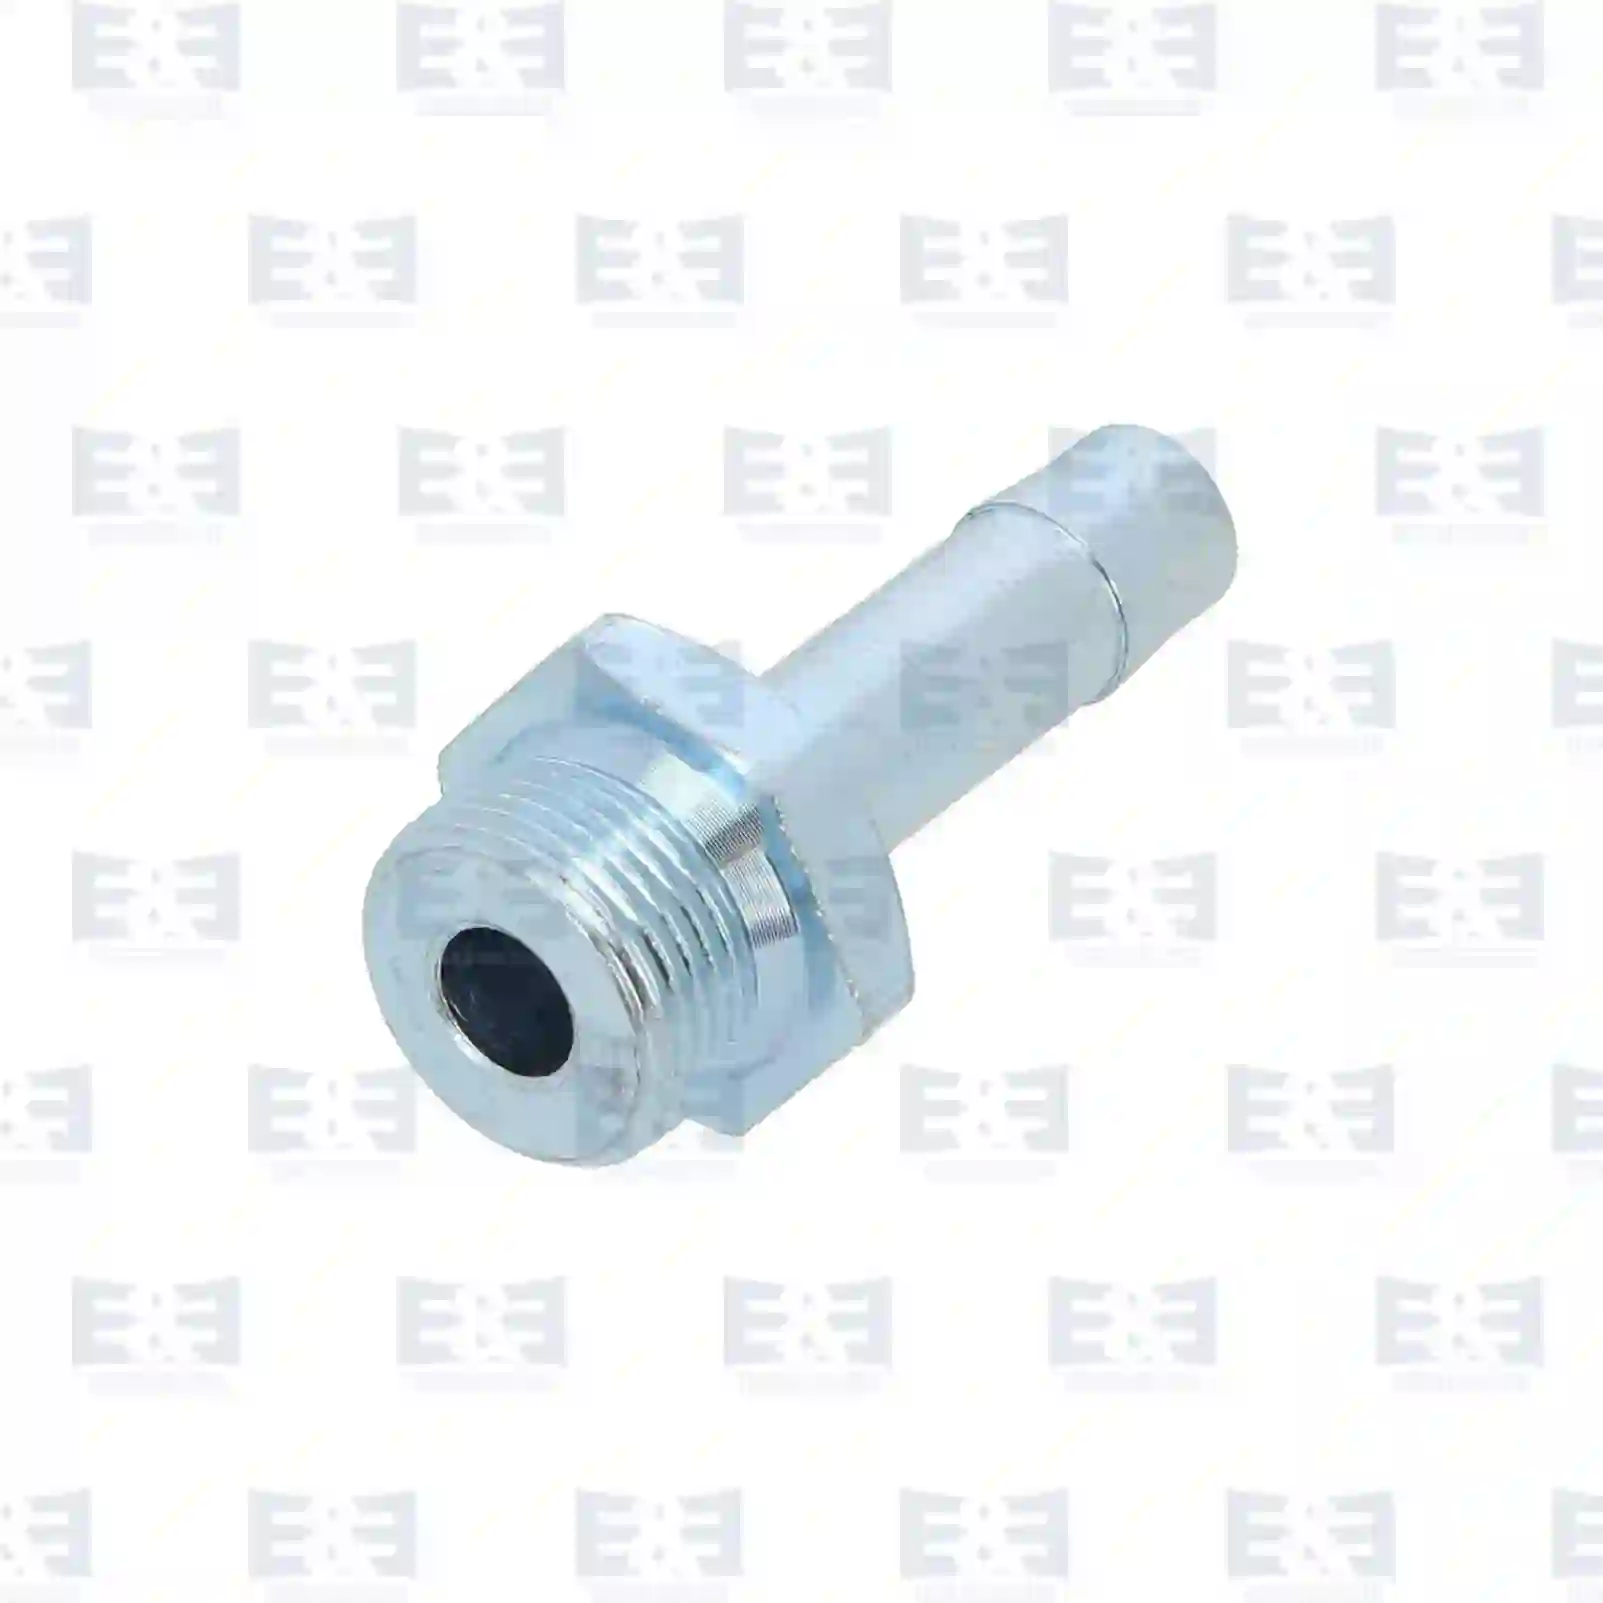  Screw-in fitting || E&E Truck Spare Parts | Truck Spare Parts, Auotomotive Spare Parts